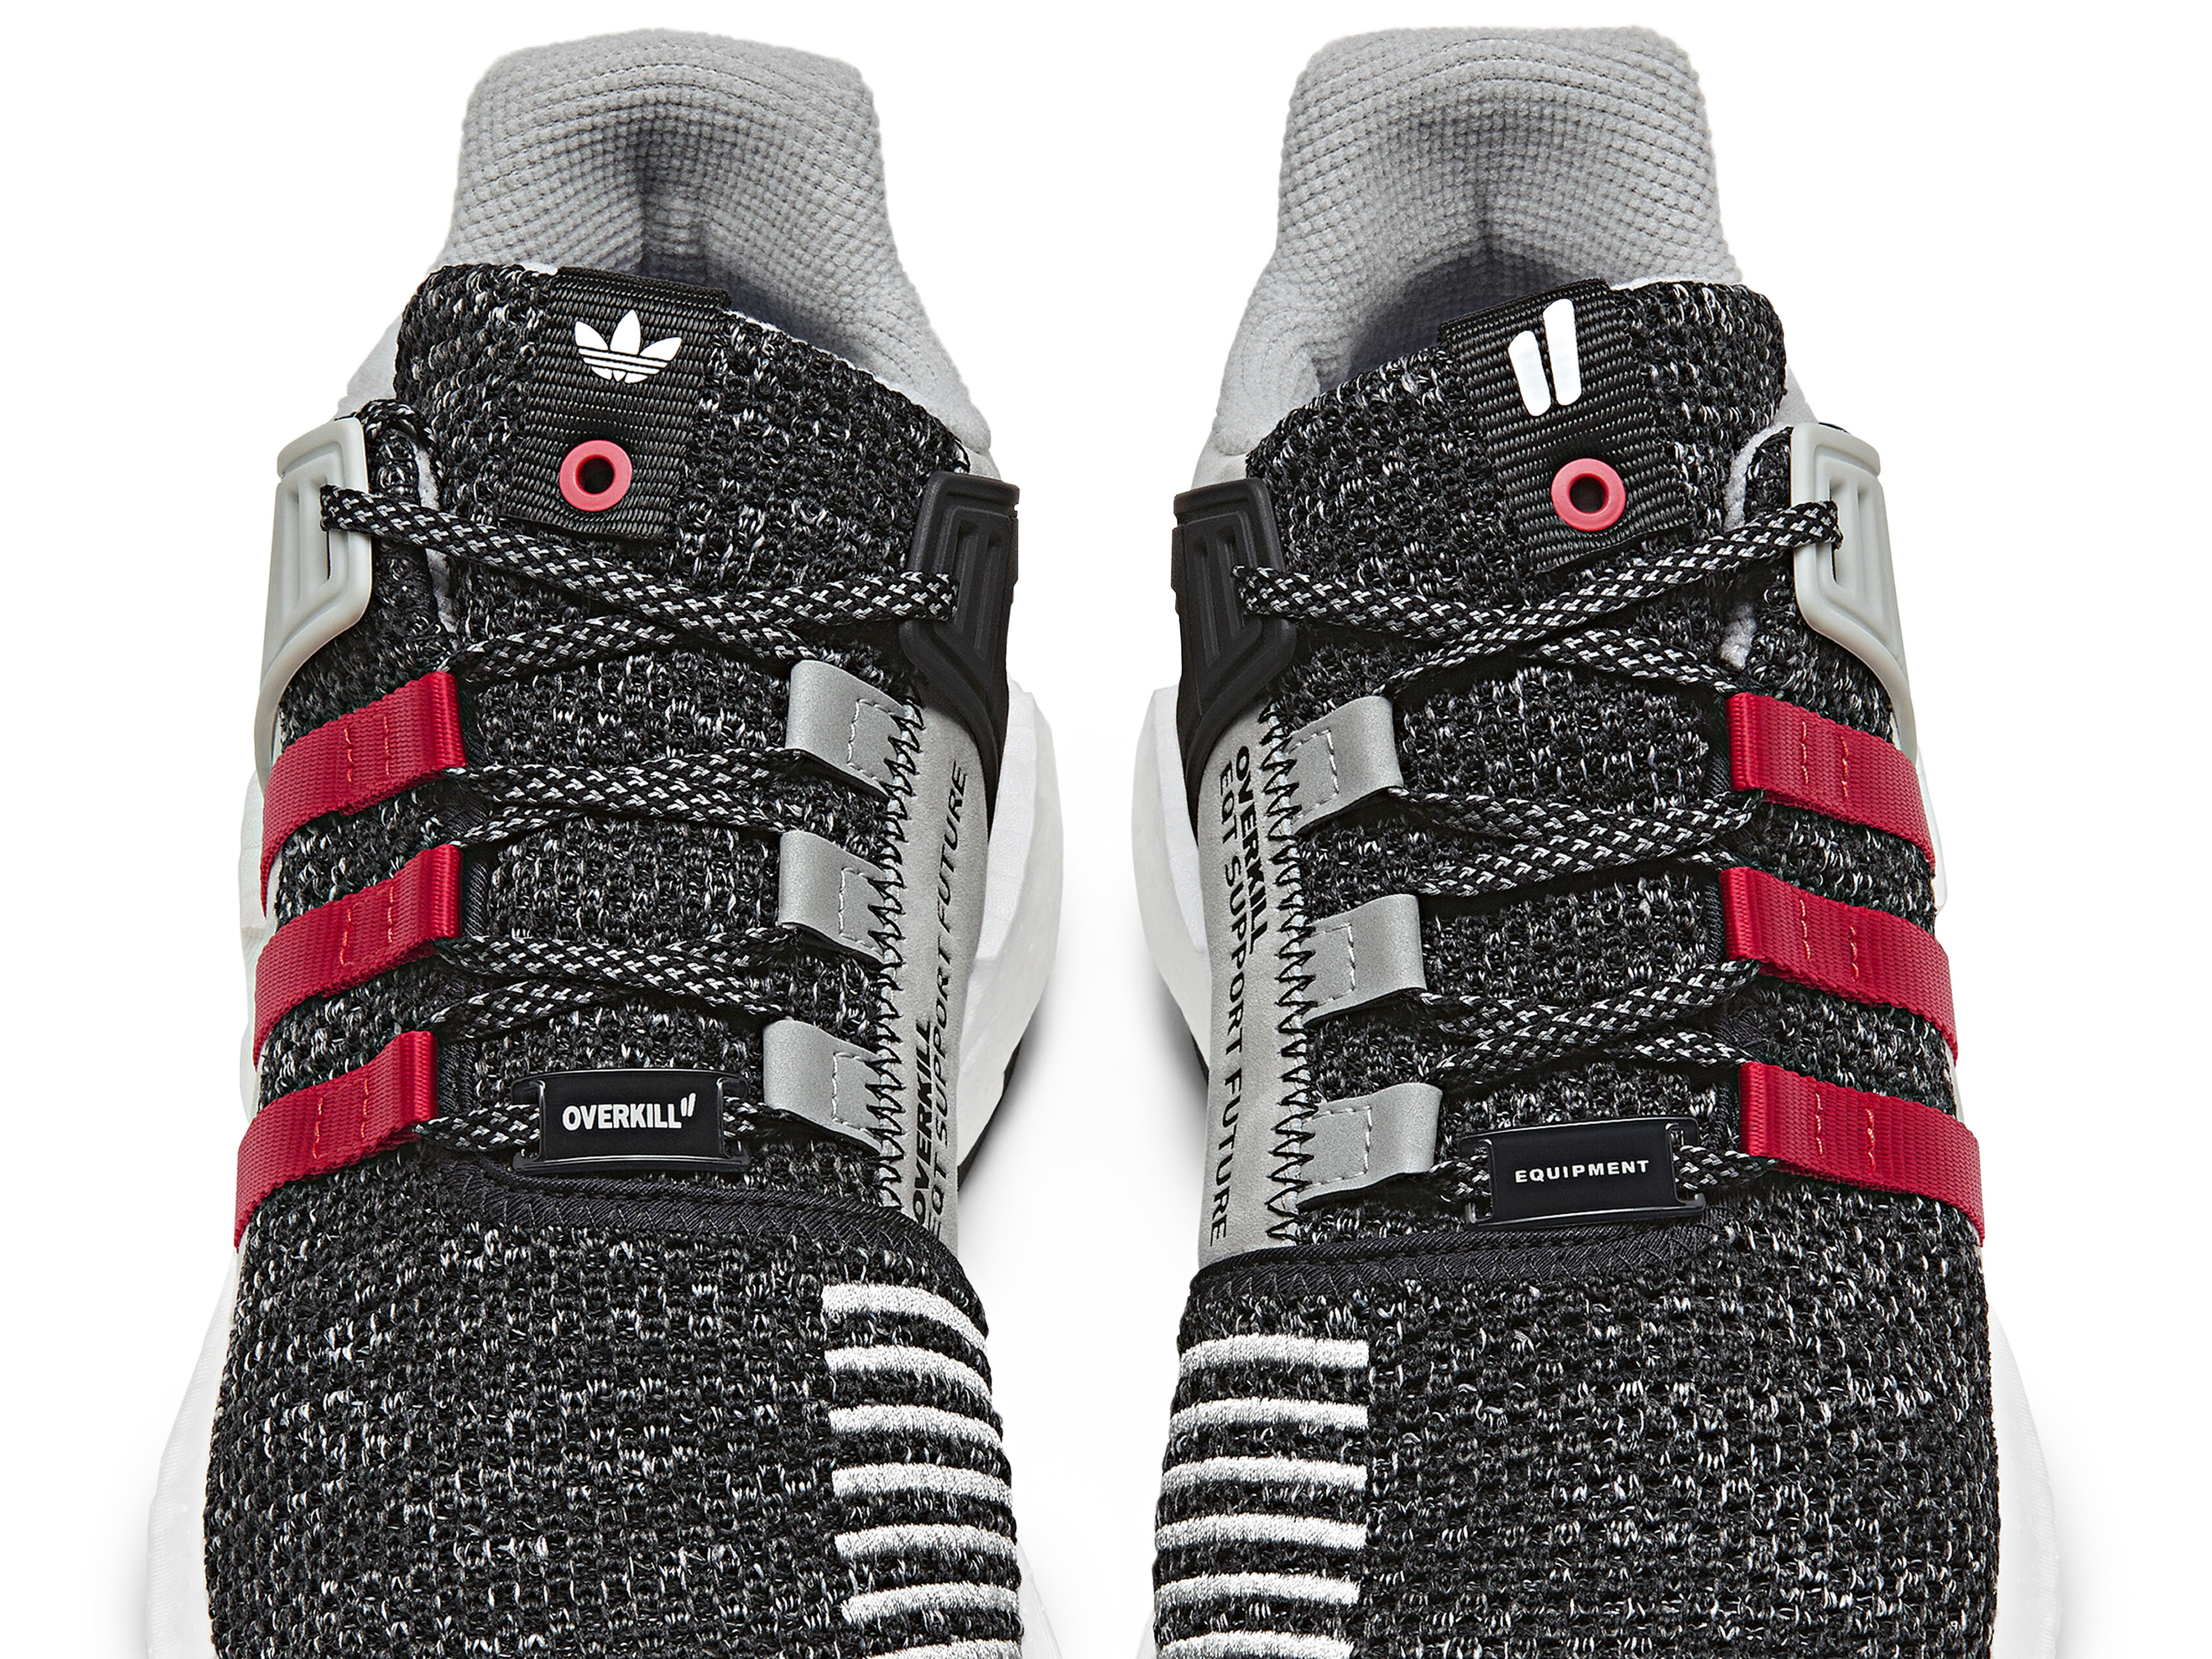 Overkill x Adidas EQT Support Future BY2913